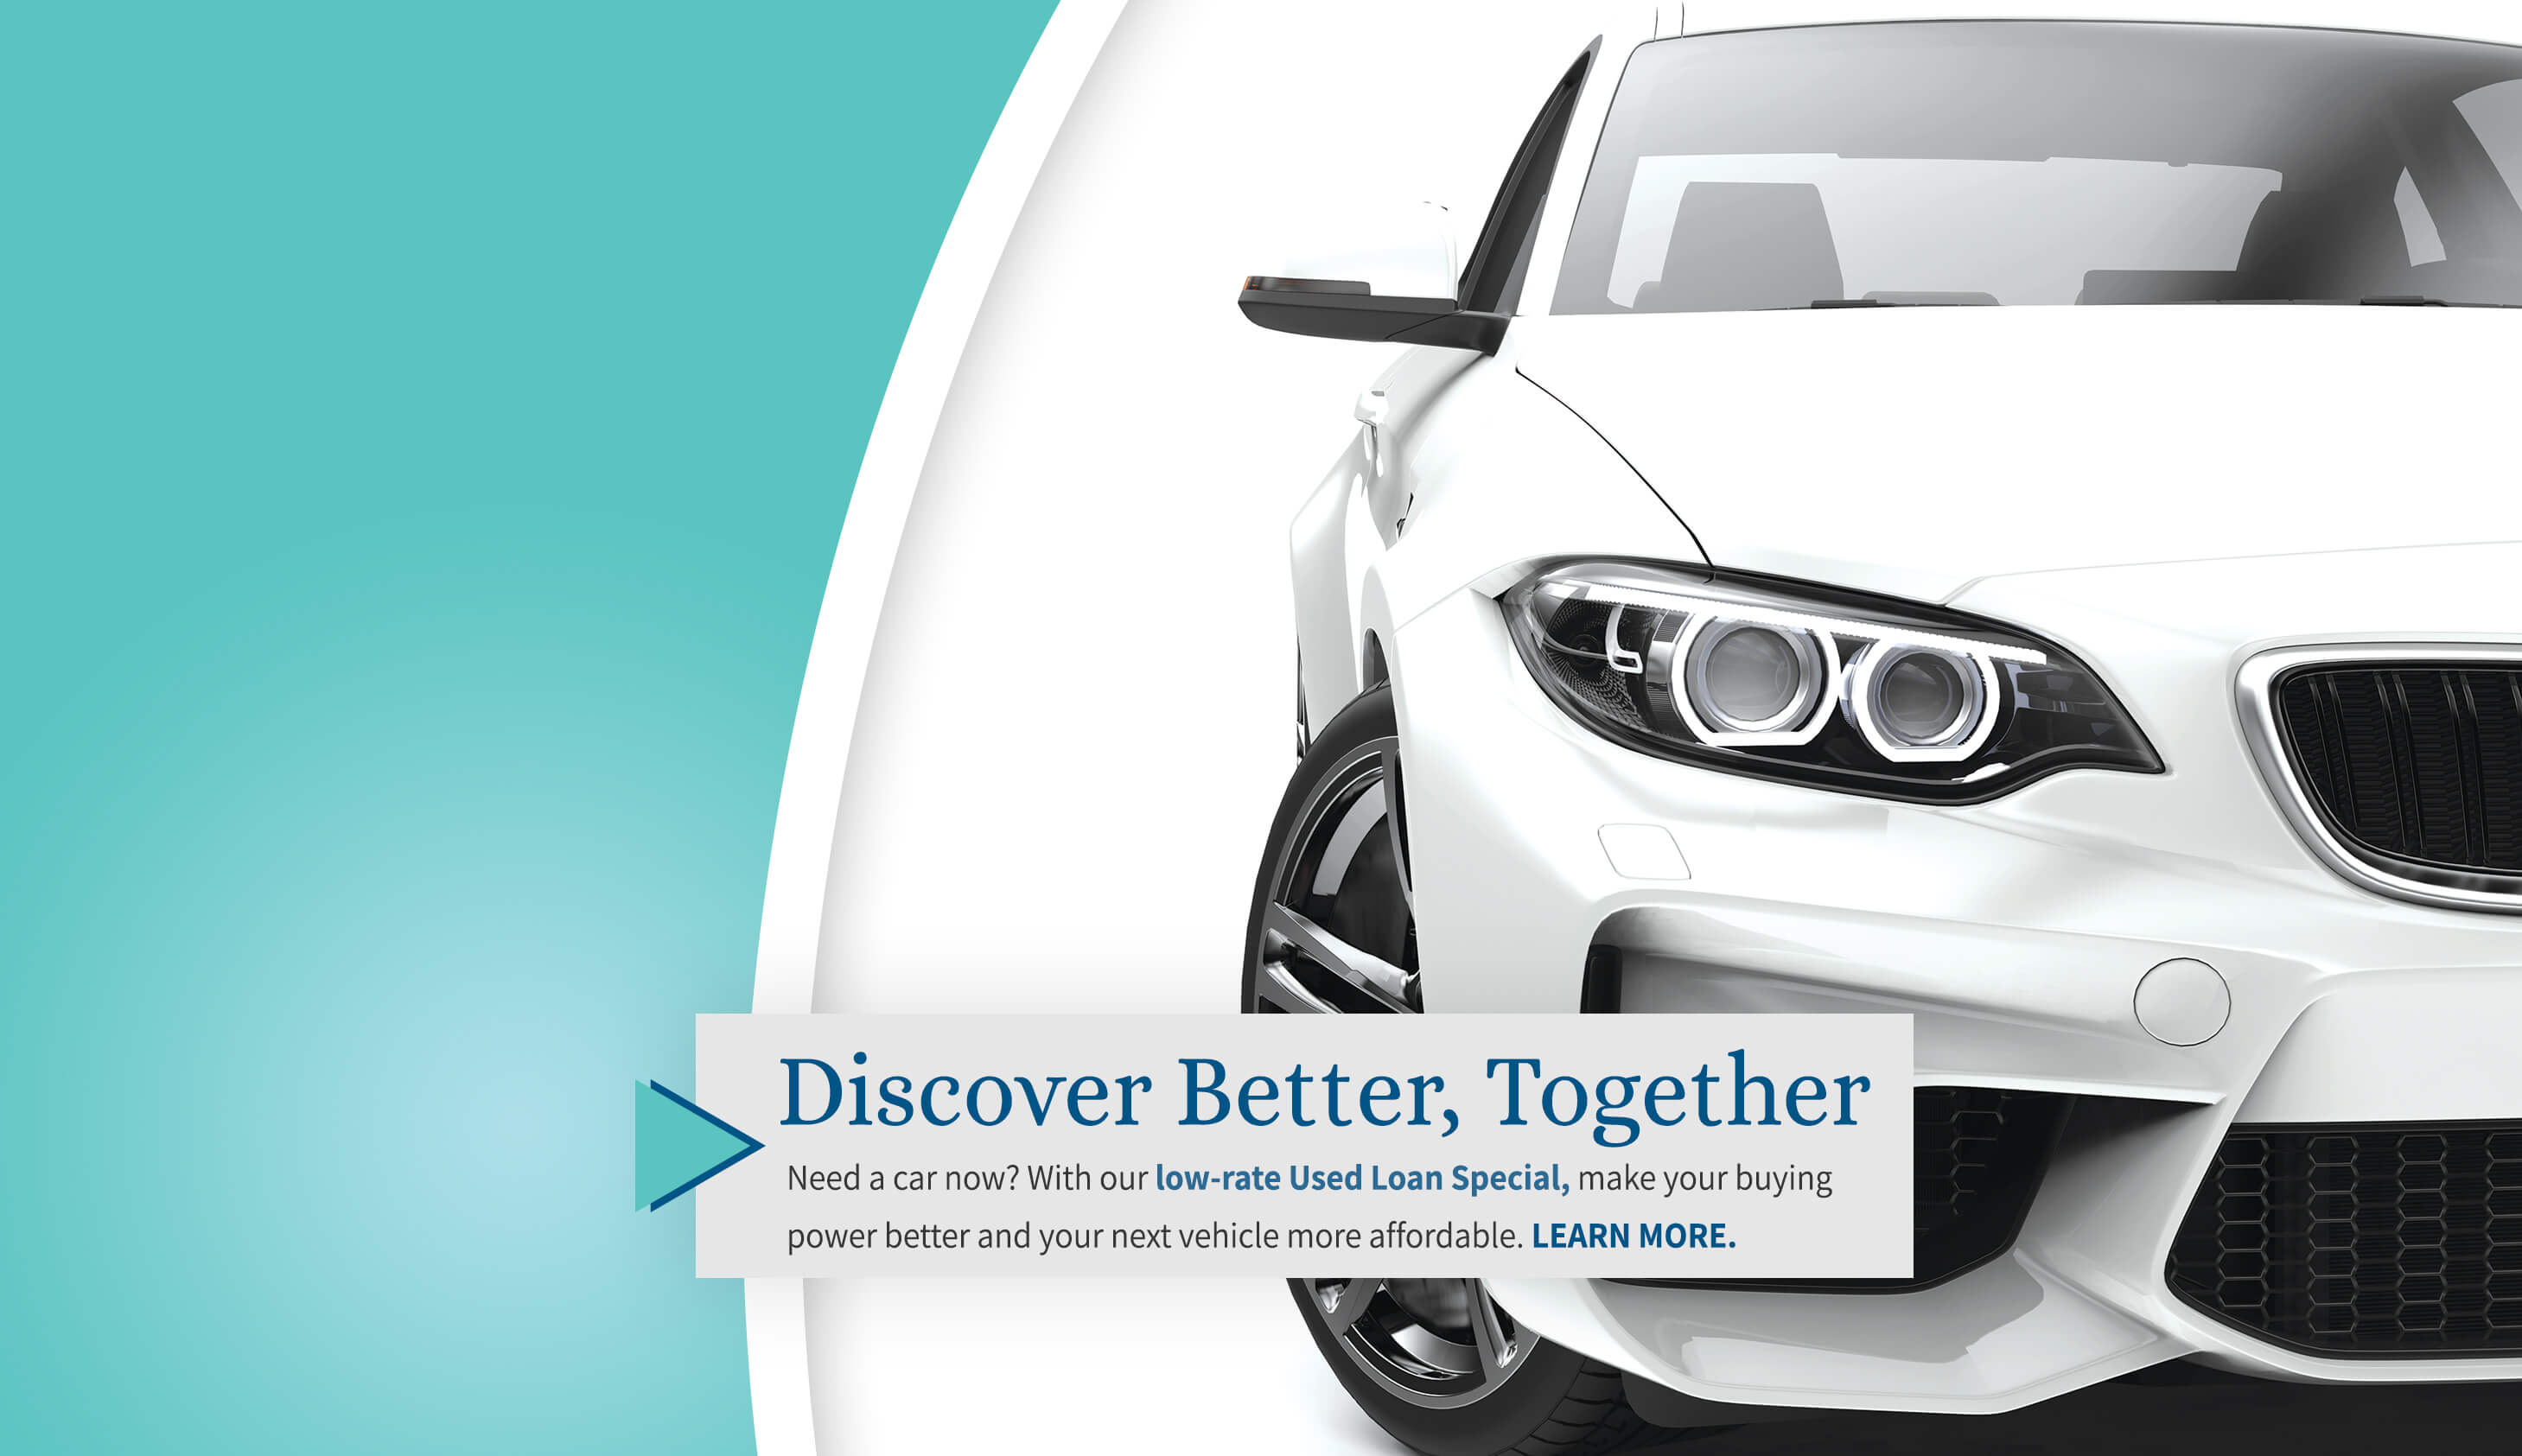 Discover Better, Together. New a car now? With our low-rate used auto loan special, make your buying power better and your next vehicle more affordable. Learn More.